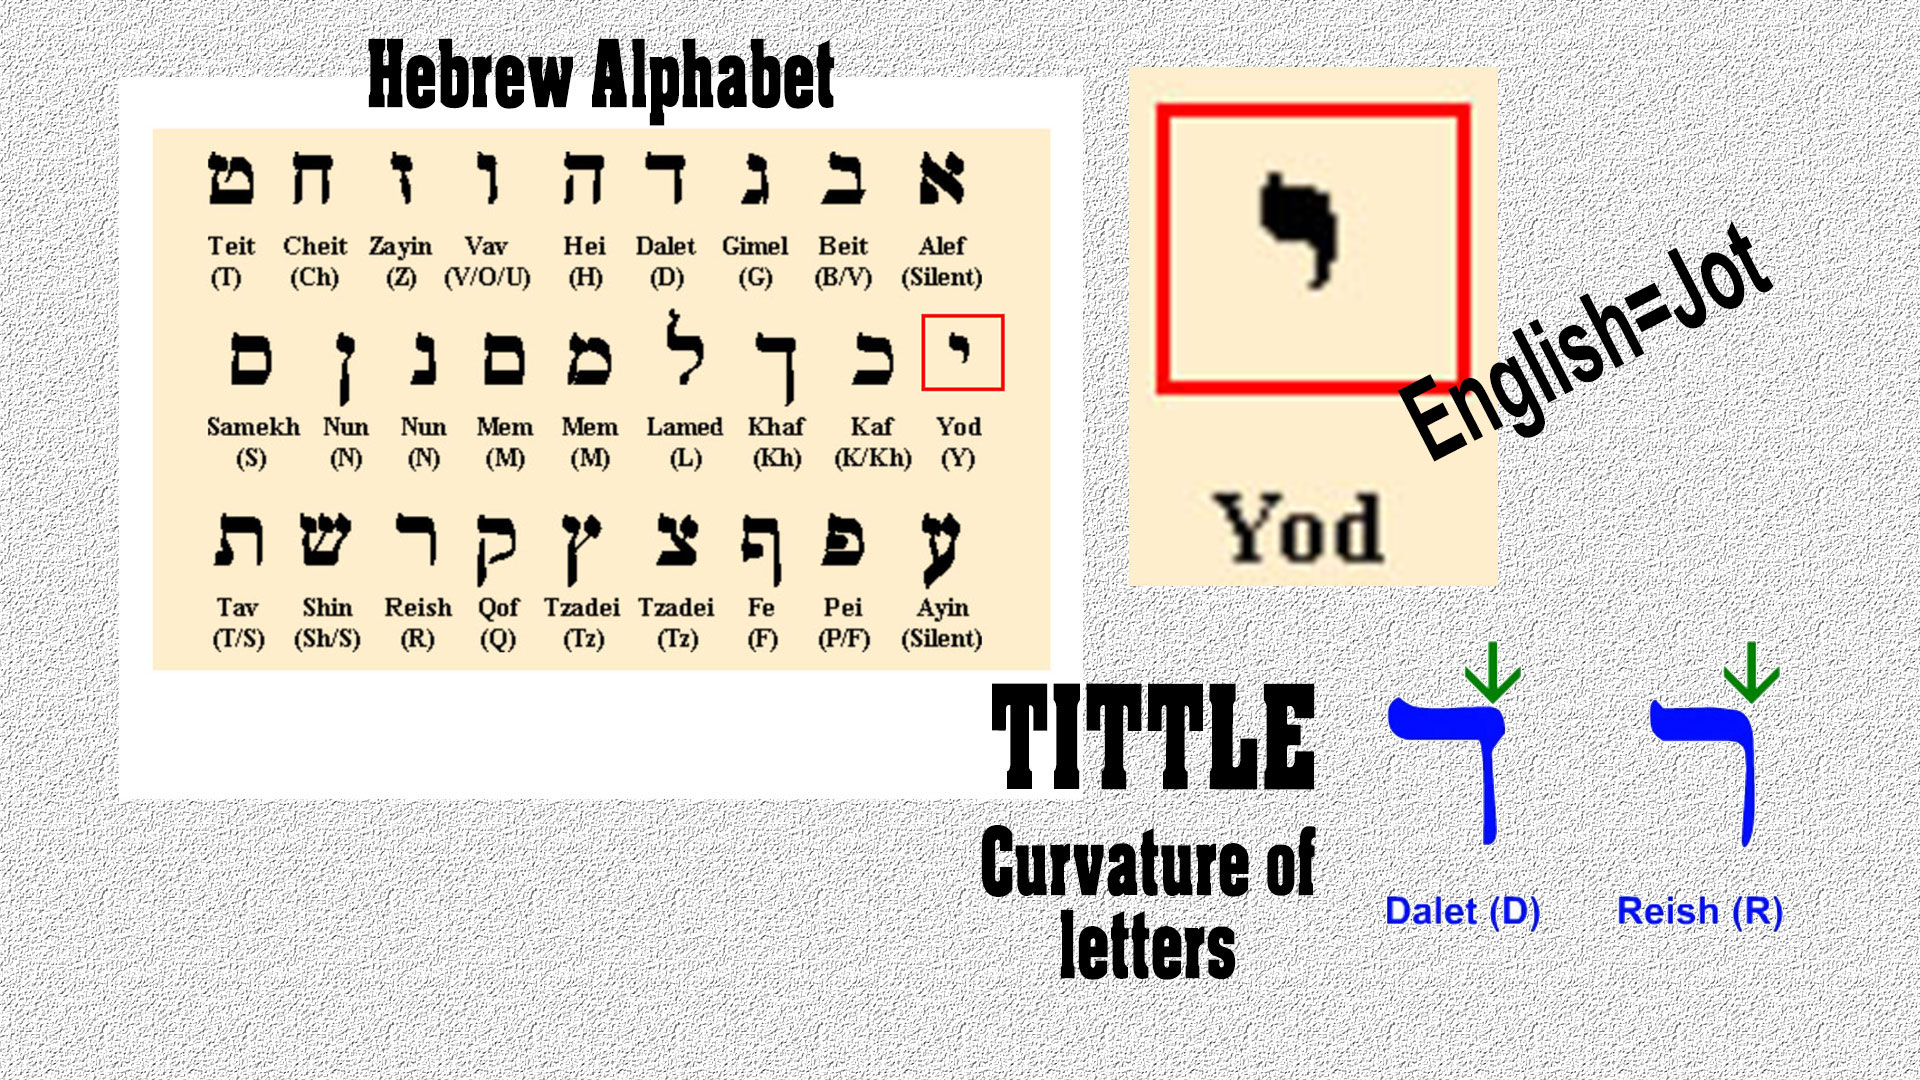 Image of Hebrew alphabet showing jot (smallest letter) and tittle (details to create letters in Hebrew language.)